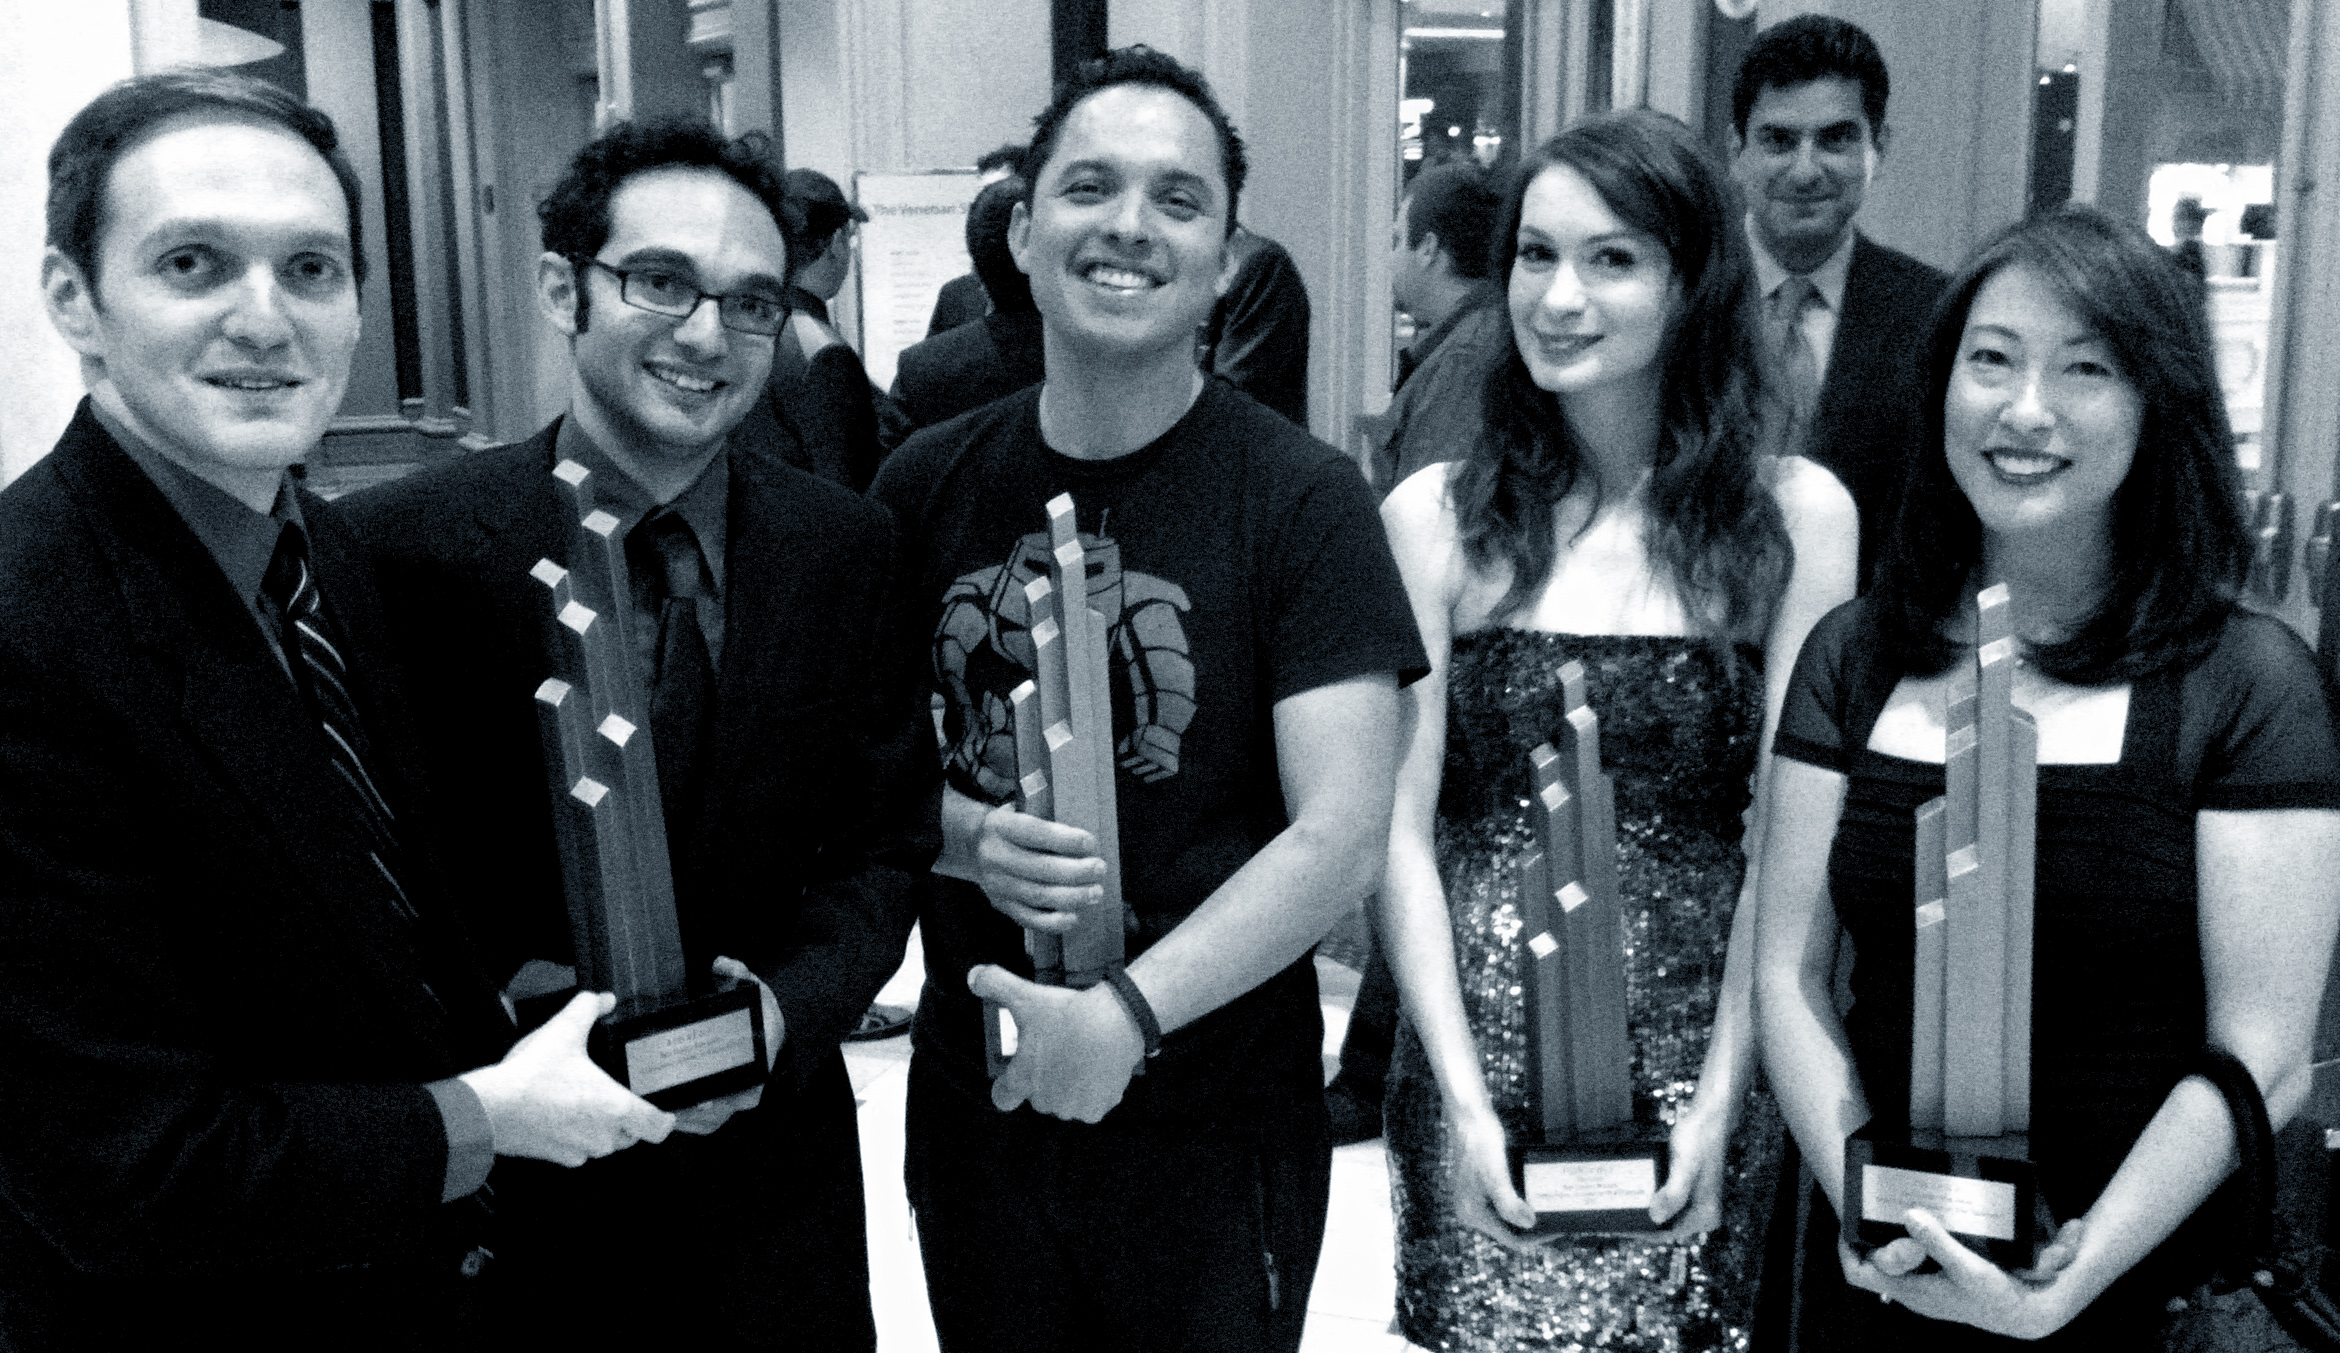 With fellow winners at the IAWTV Awards. (2012)